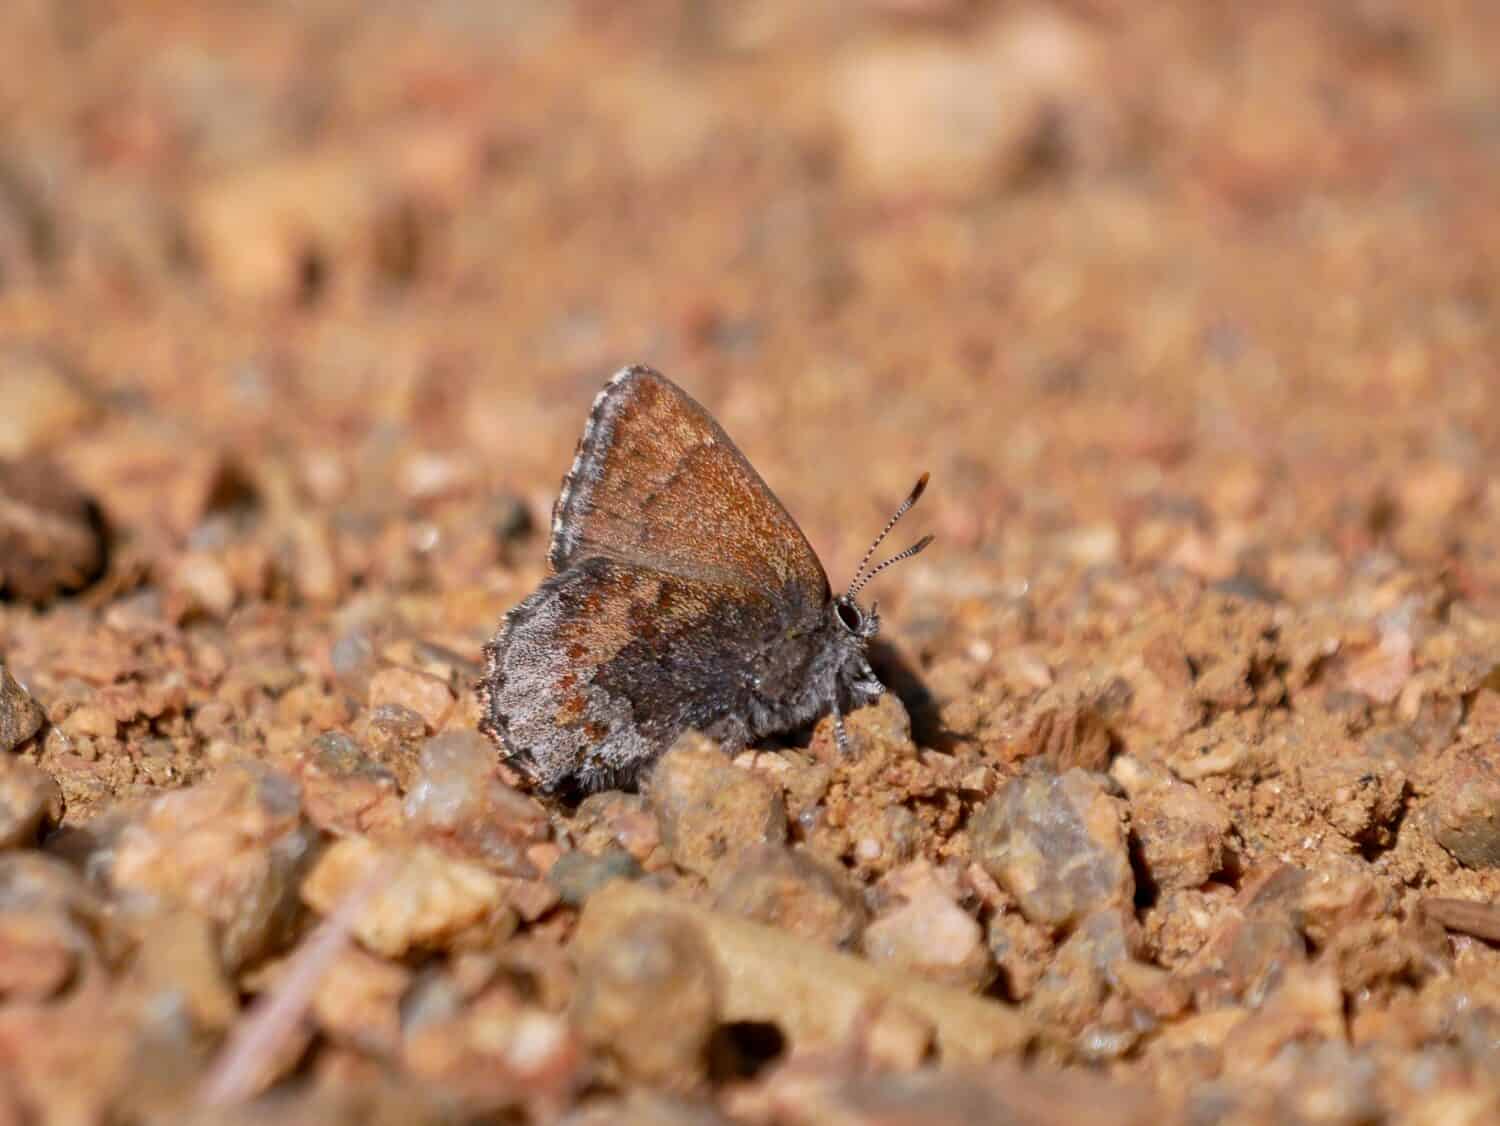 Frosted elfin Callophrys irus butterfly